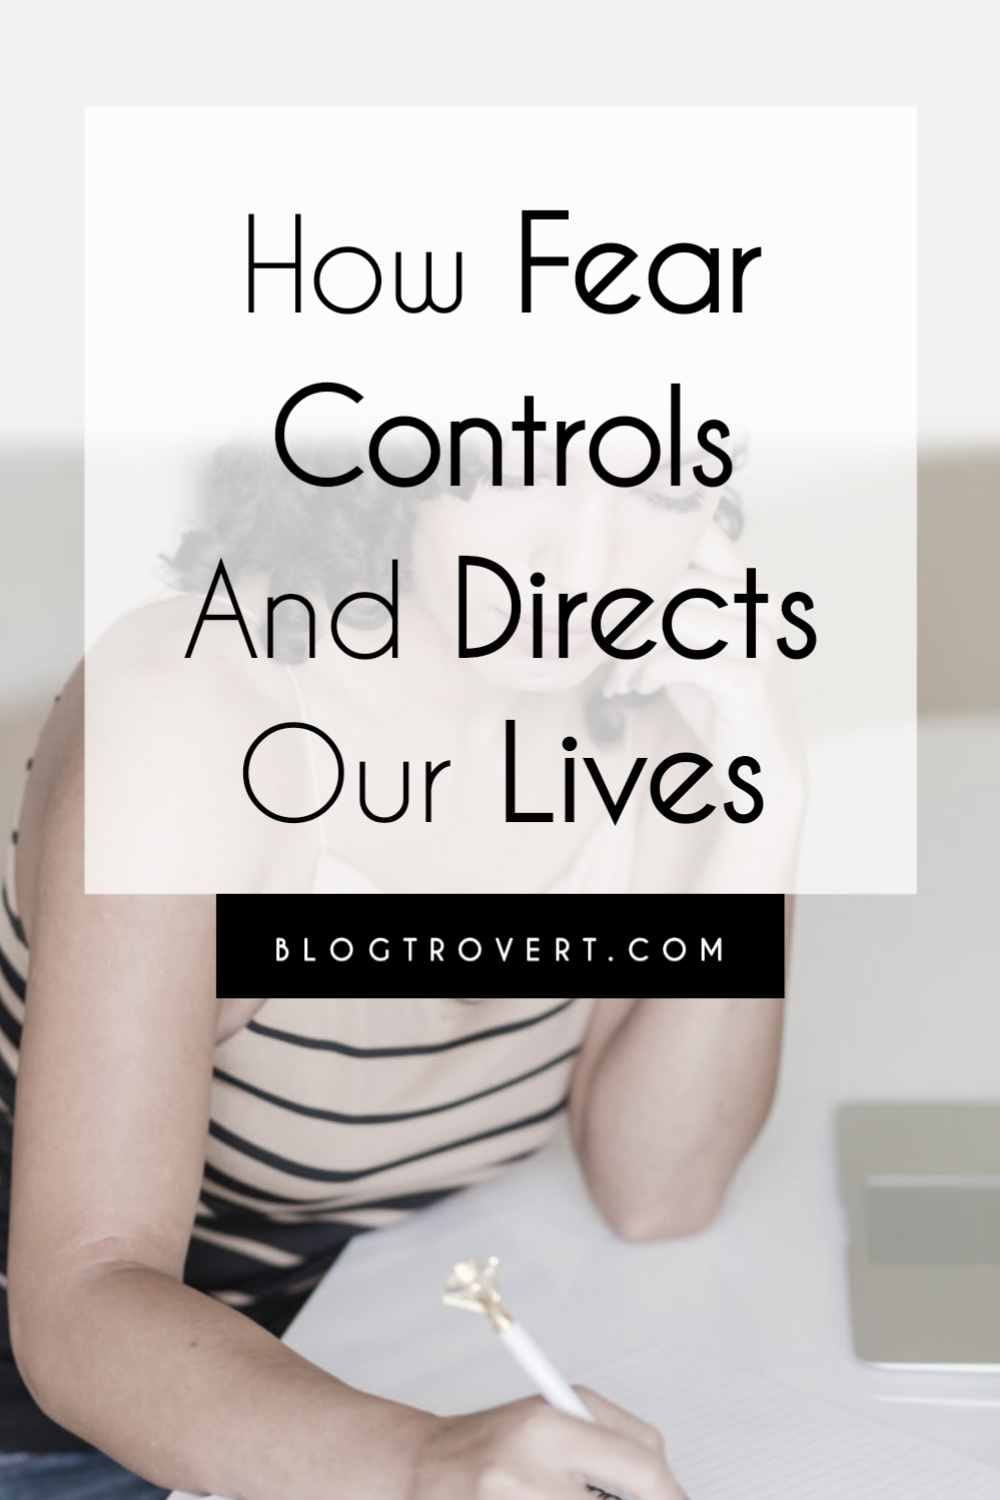 How fear controls us - Why we must take over 4